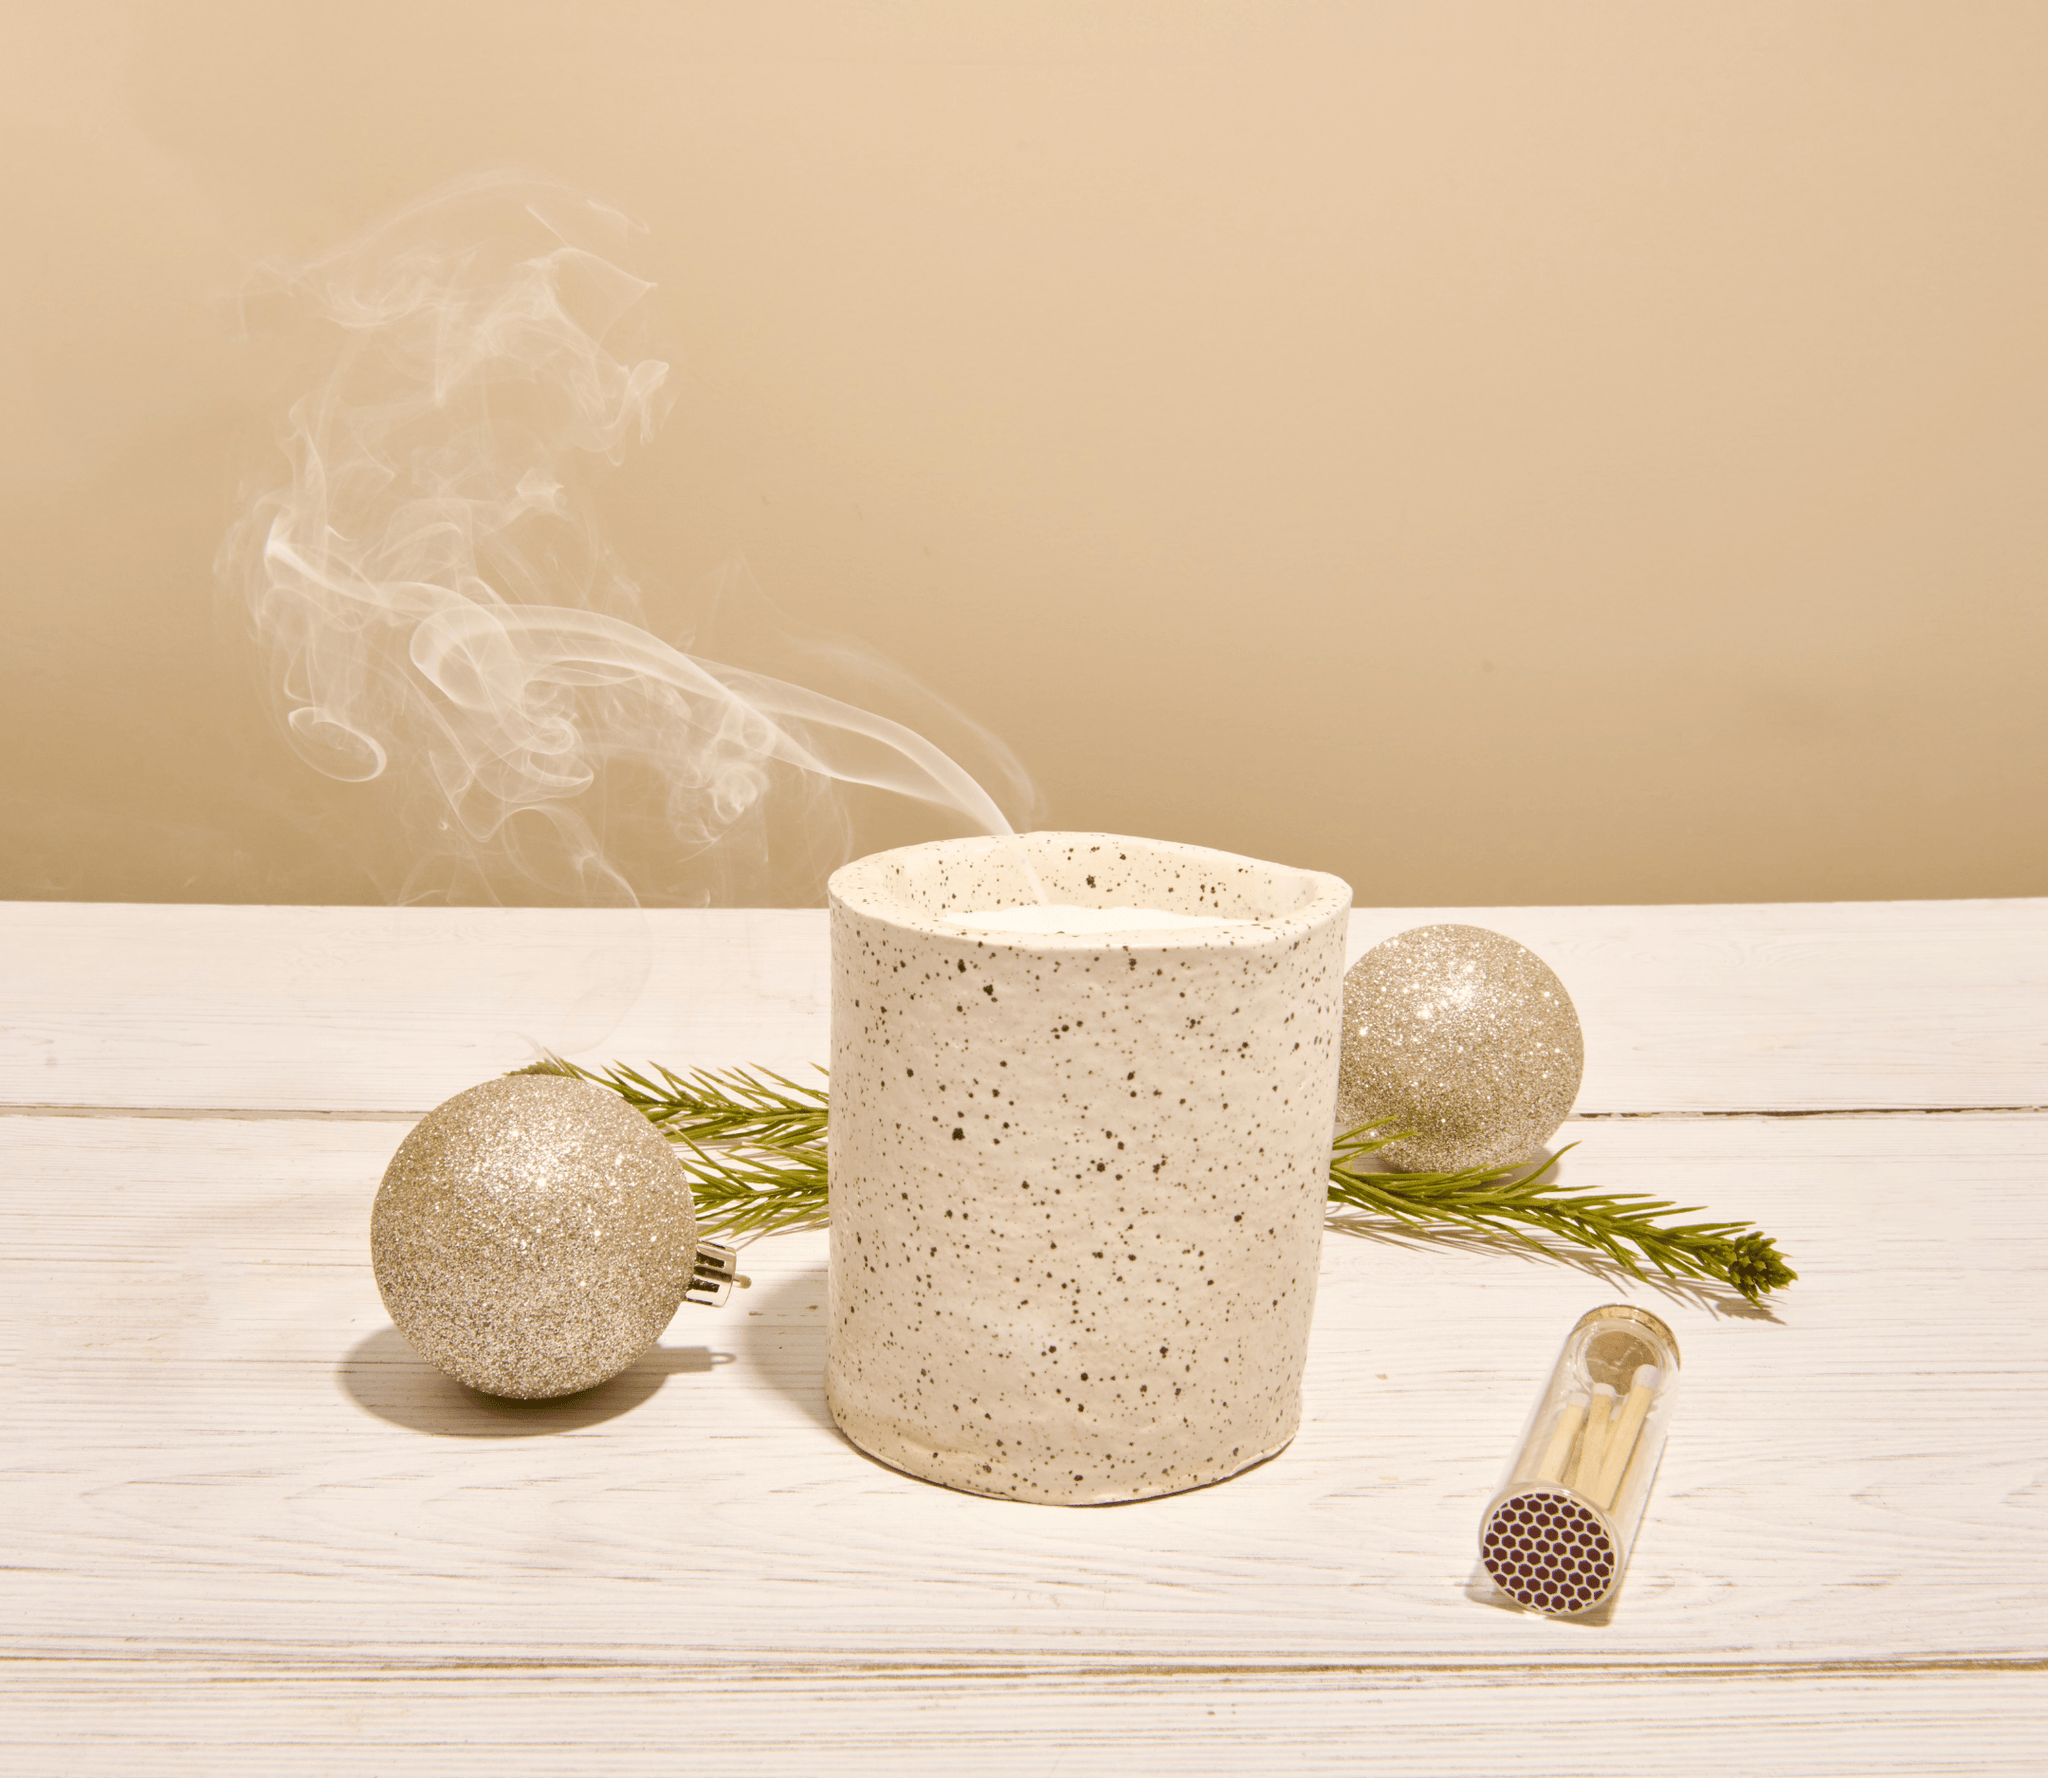 We adore these candles with a cork lid. Order yours online today. Several  inspiring scents to choose from.